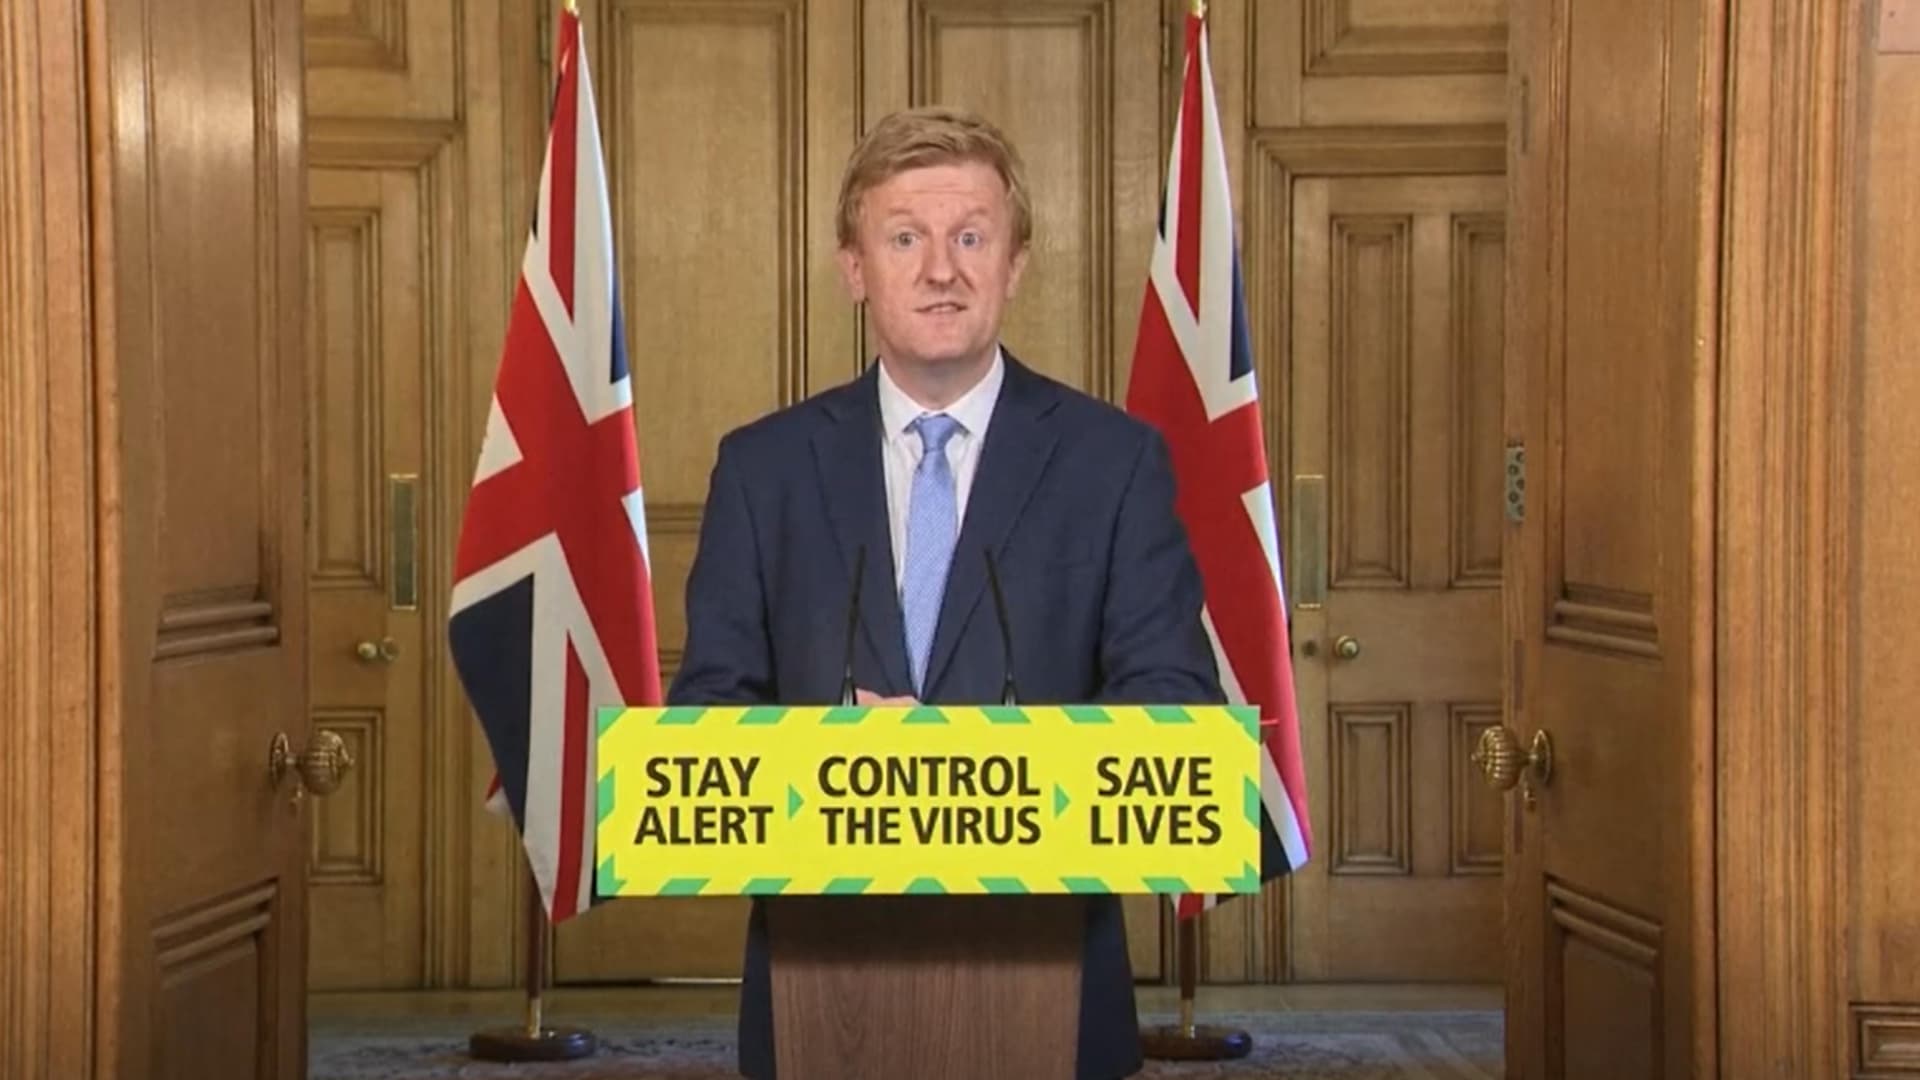 Screen grab of Digital, Culture, Media and Sport Secretary Oliver Dowden during a Covid media briefing in Downing Street, London, on May 20, 2020.